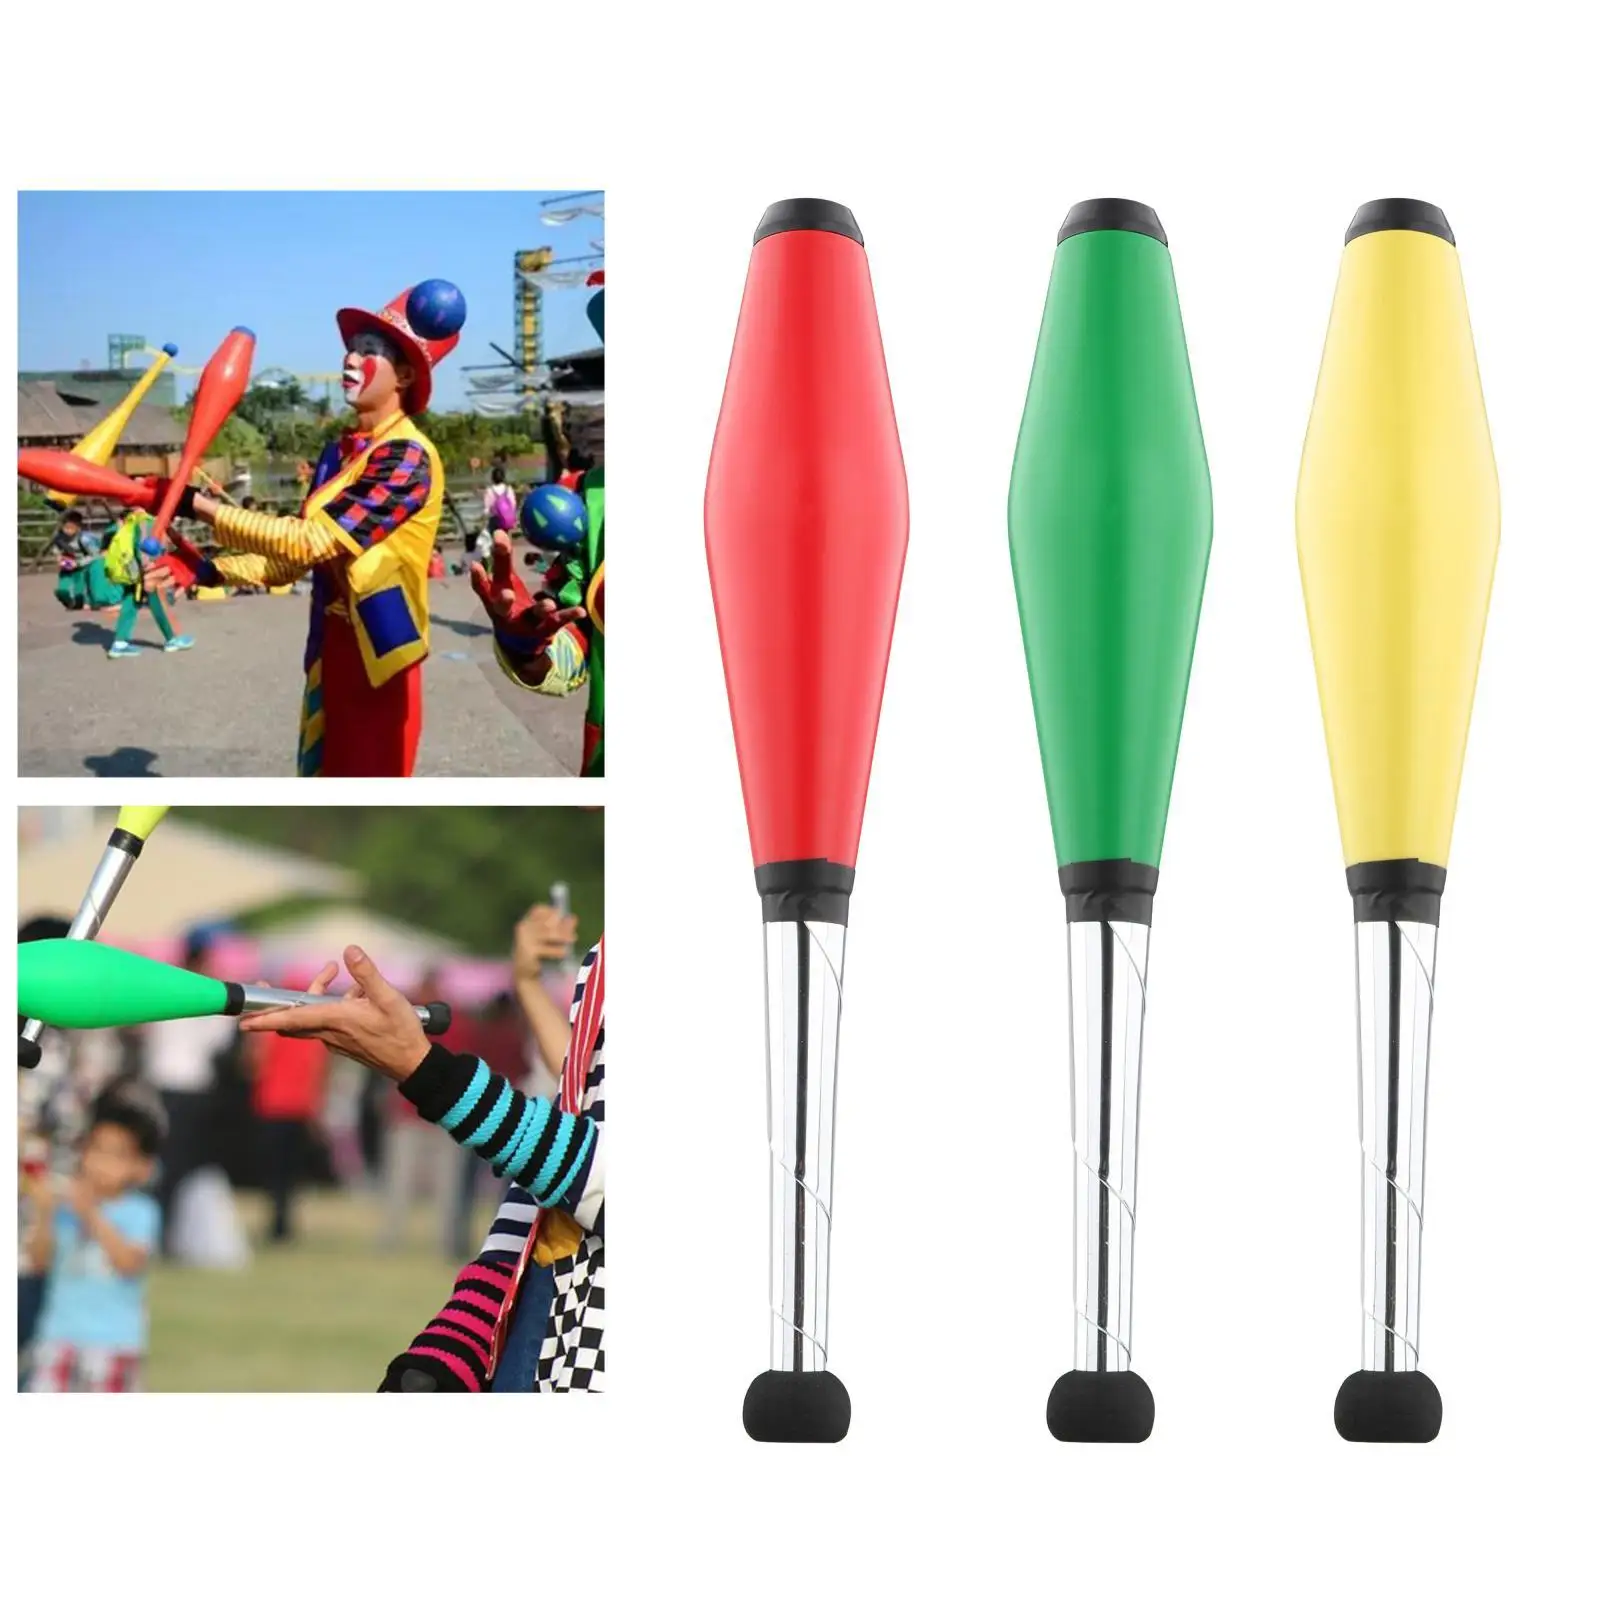 Professional juggling clubs sticks pins ultralight for circus comedy